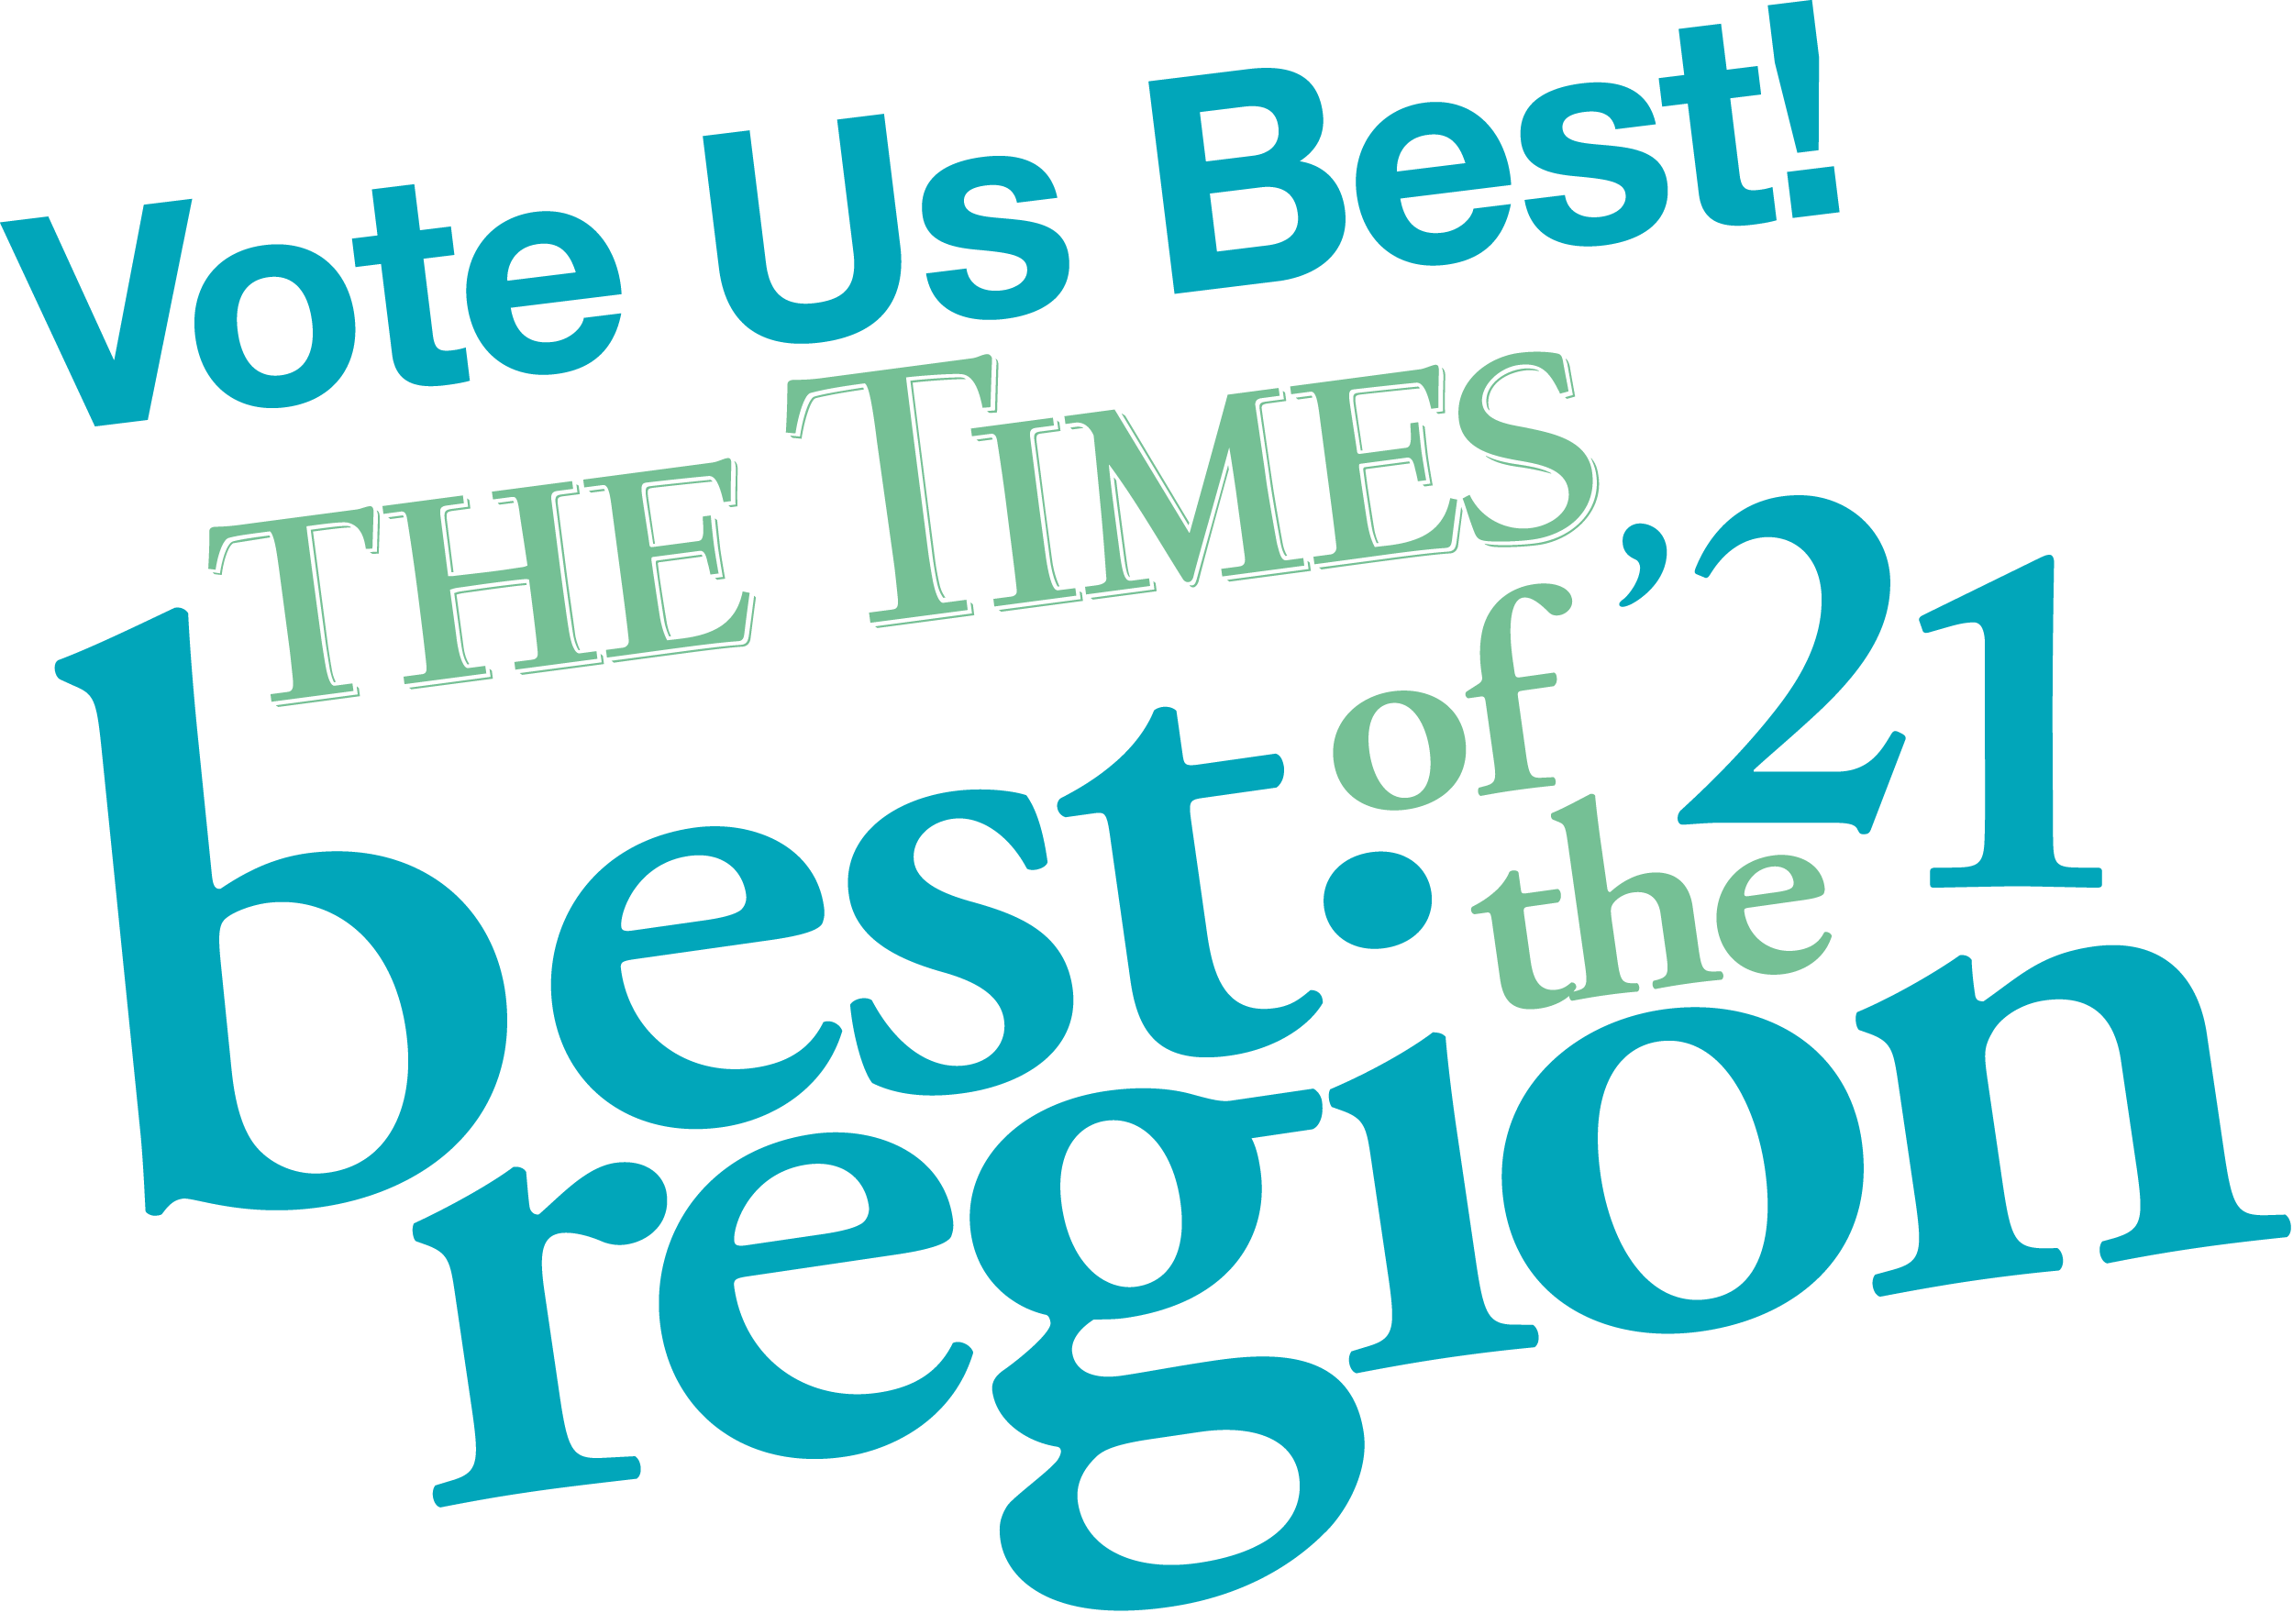 Northwest Indiana Times’"Best of the Region 2021" Reader’s Poll